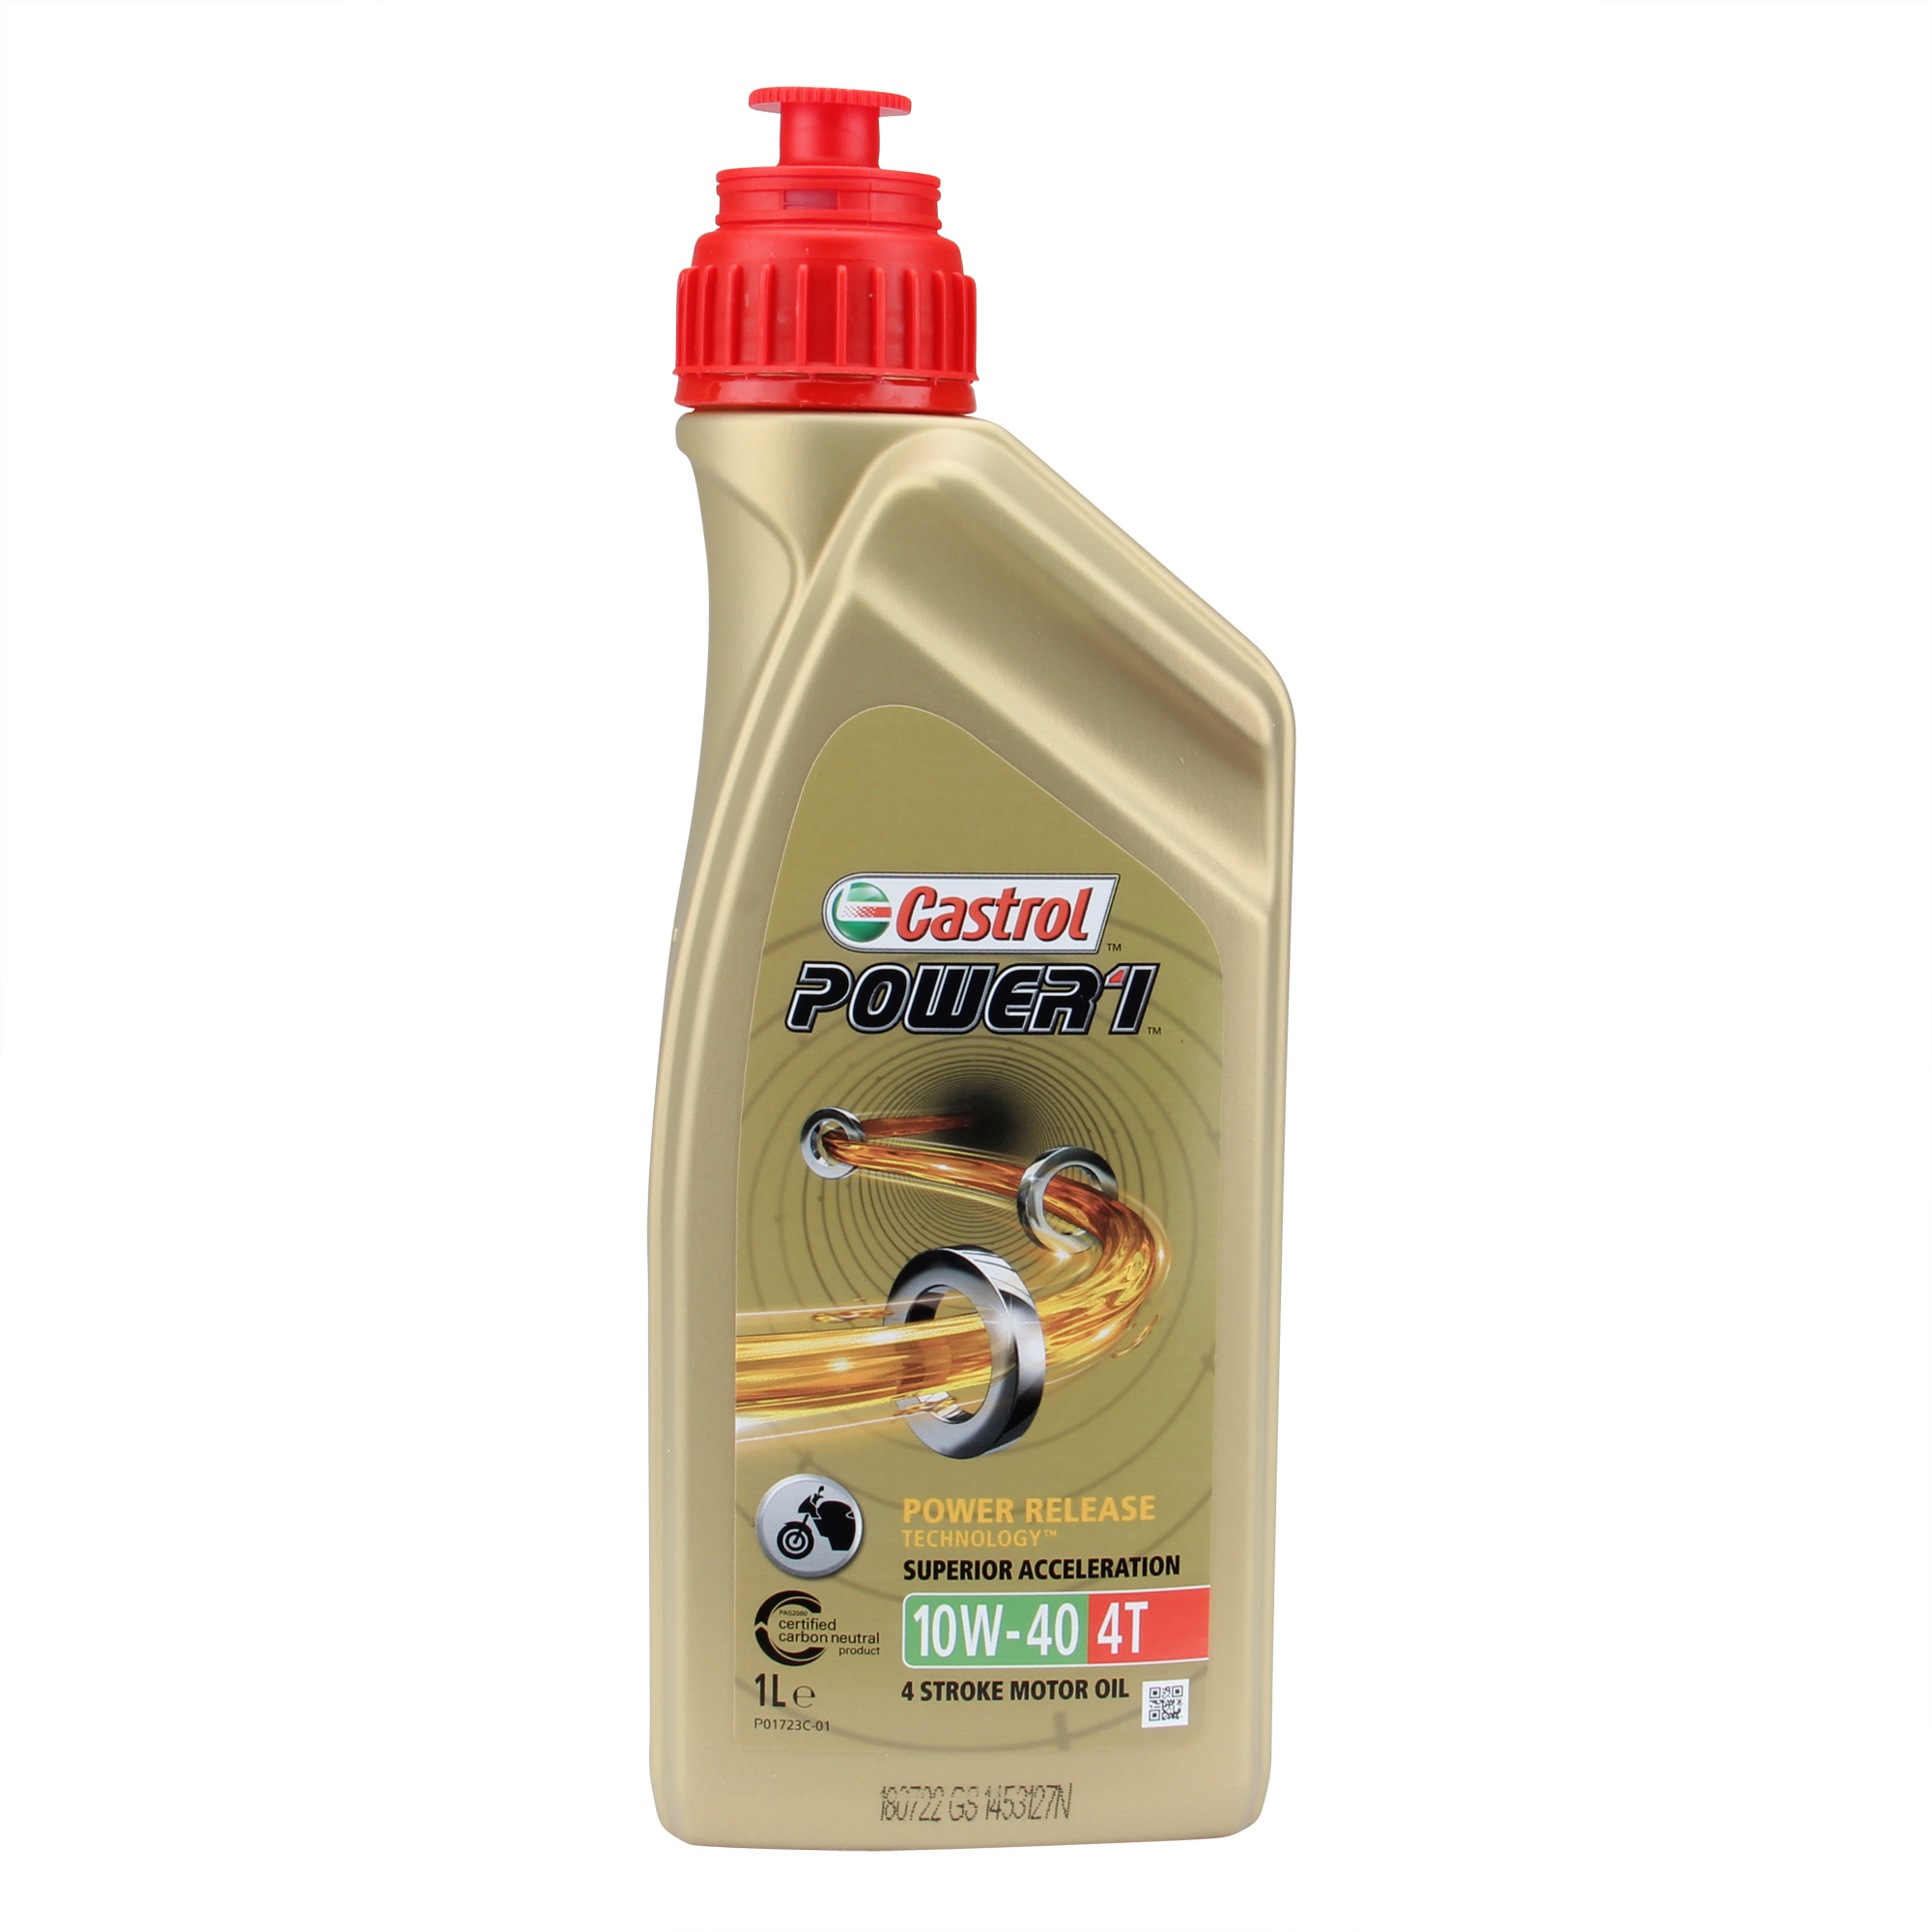 Engine oil Castrol SAE 10W-40 Power Racing 4T synthetic liter can  Pegaso 650 GA year 1992-1995 Aprilia Models bicycle  and motorcycle parts